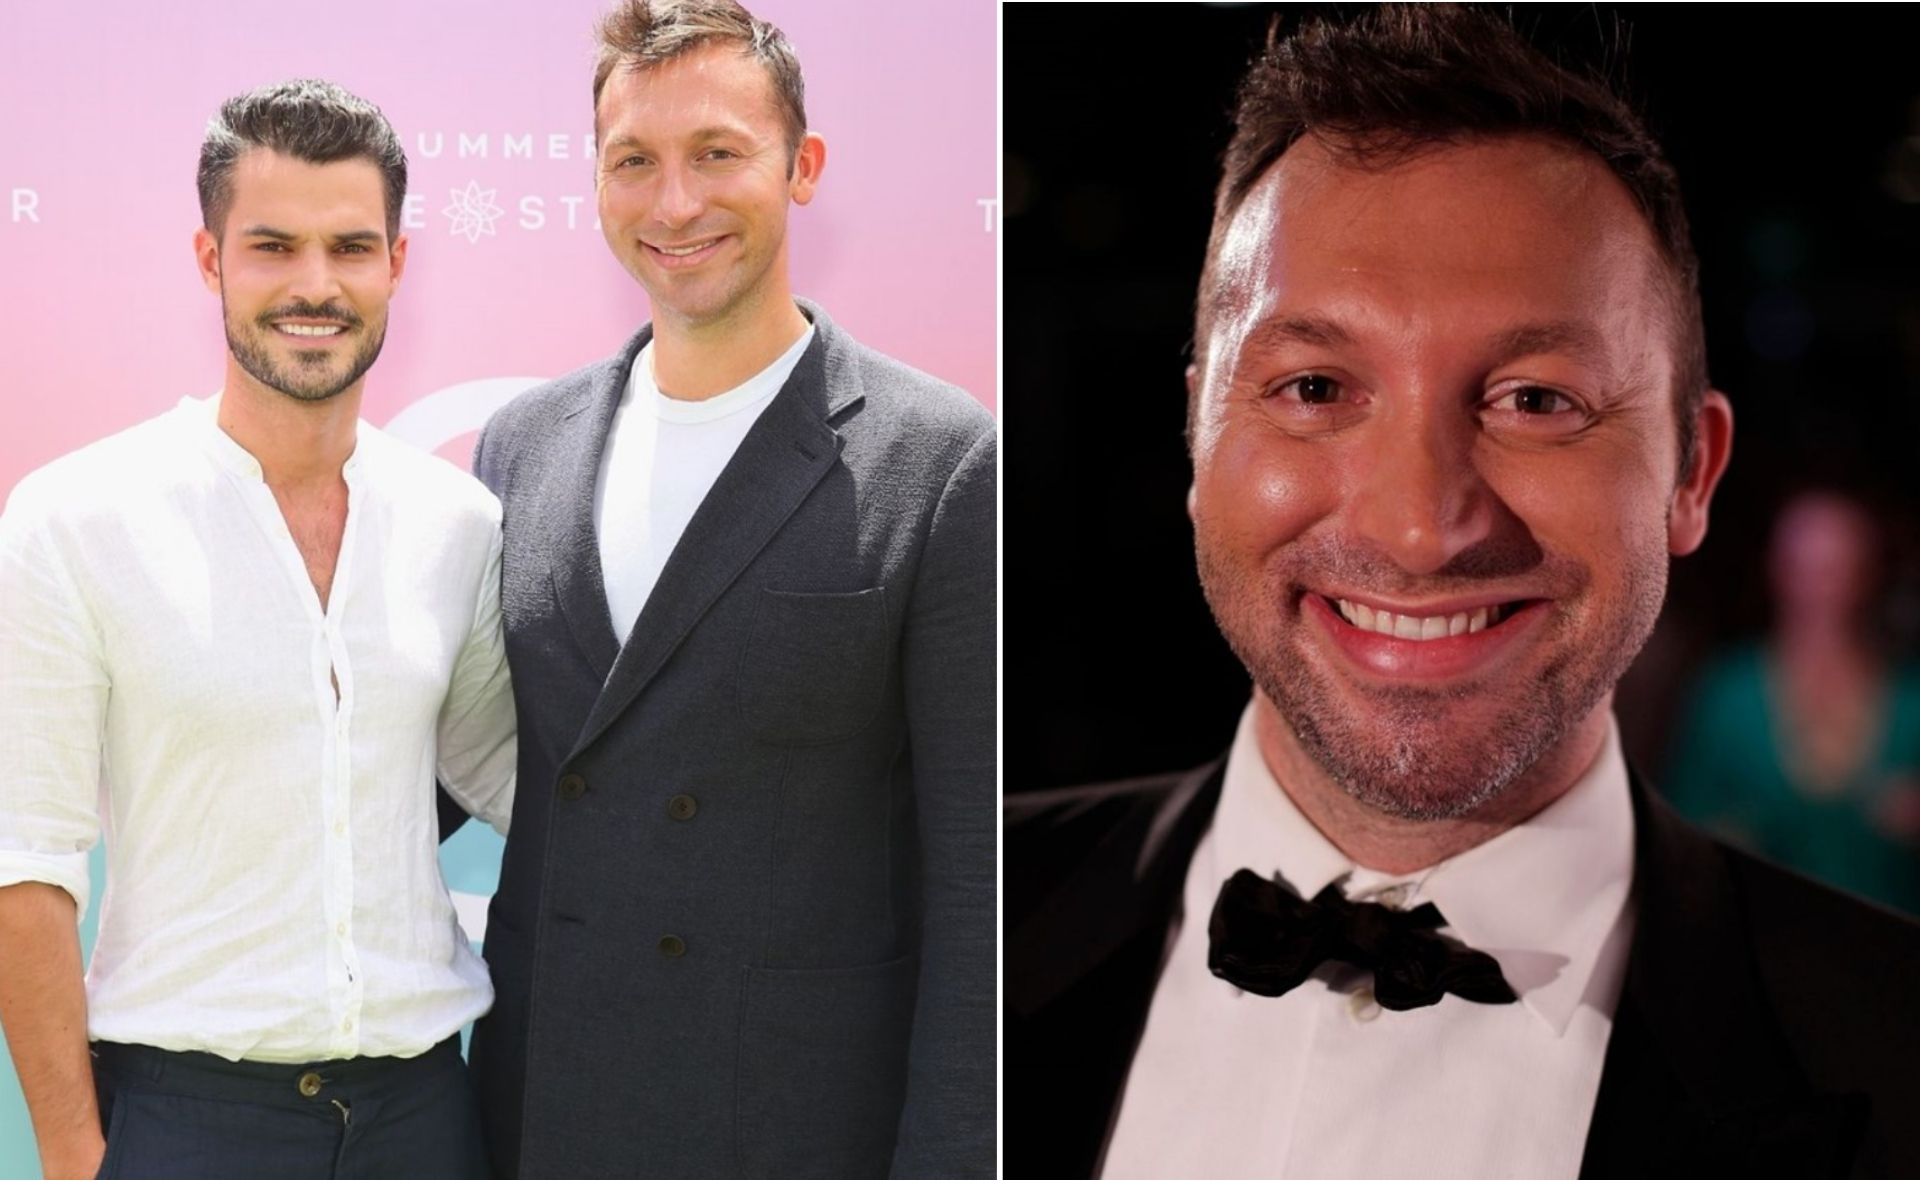 A definitive guide to Olympian Ian Thorpe’s recent and private romantic history